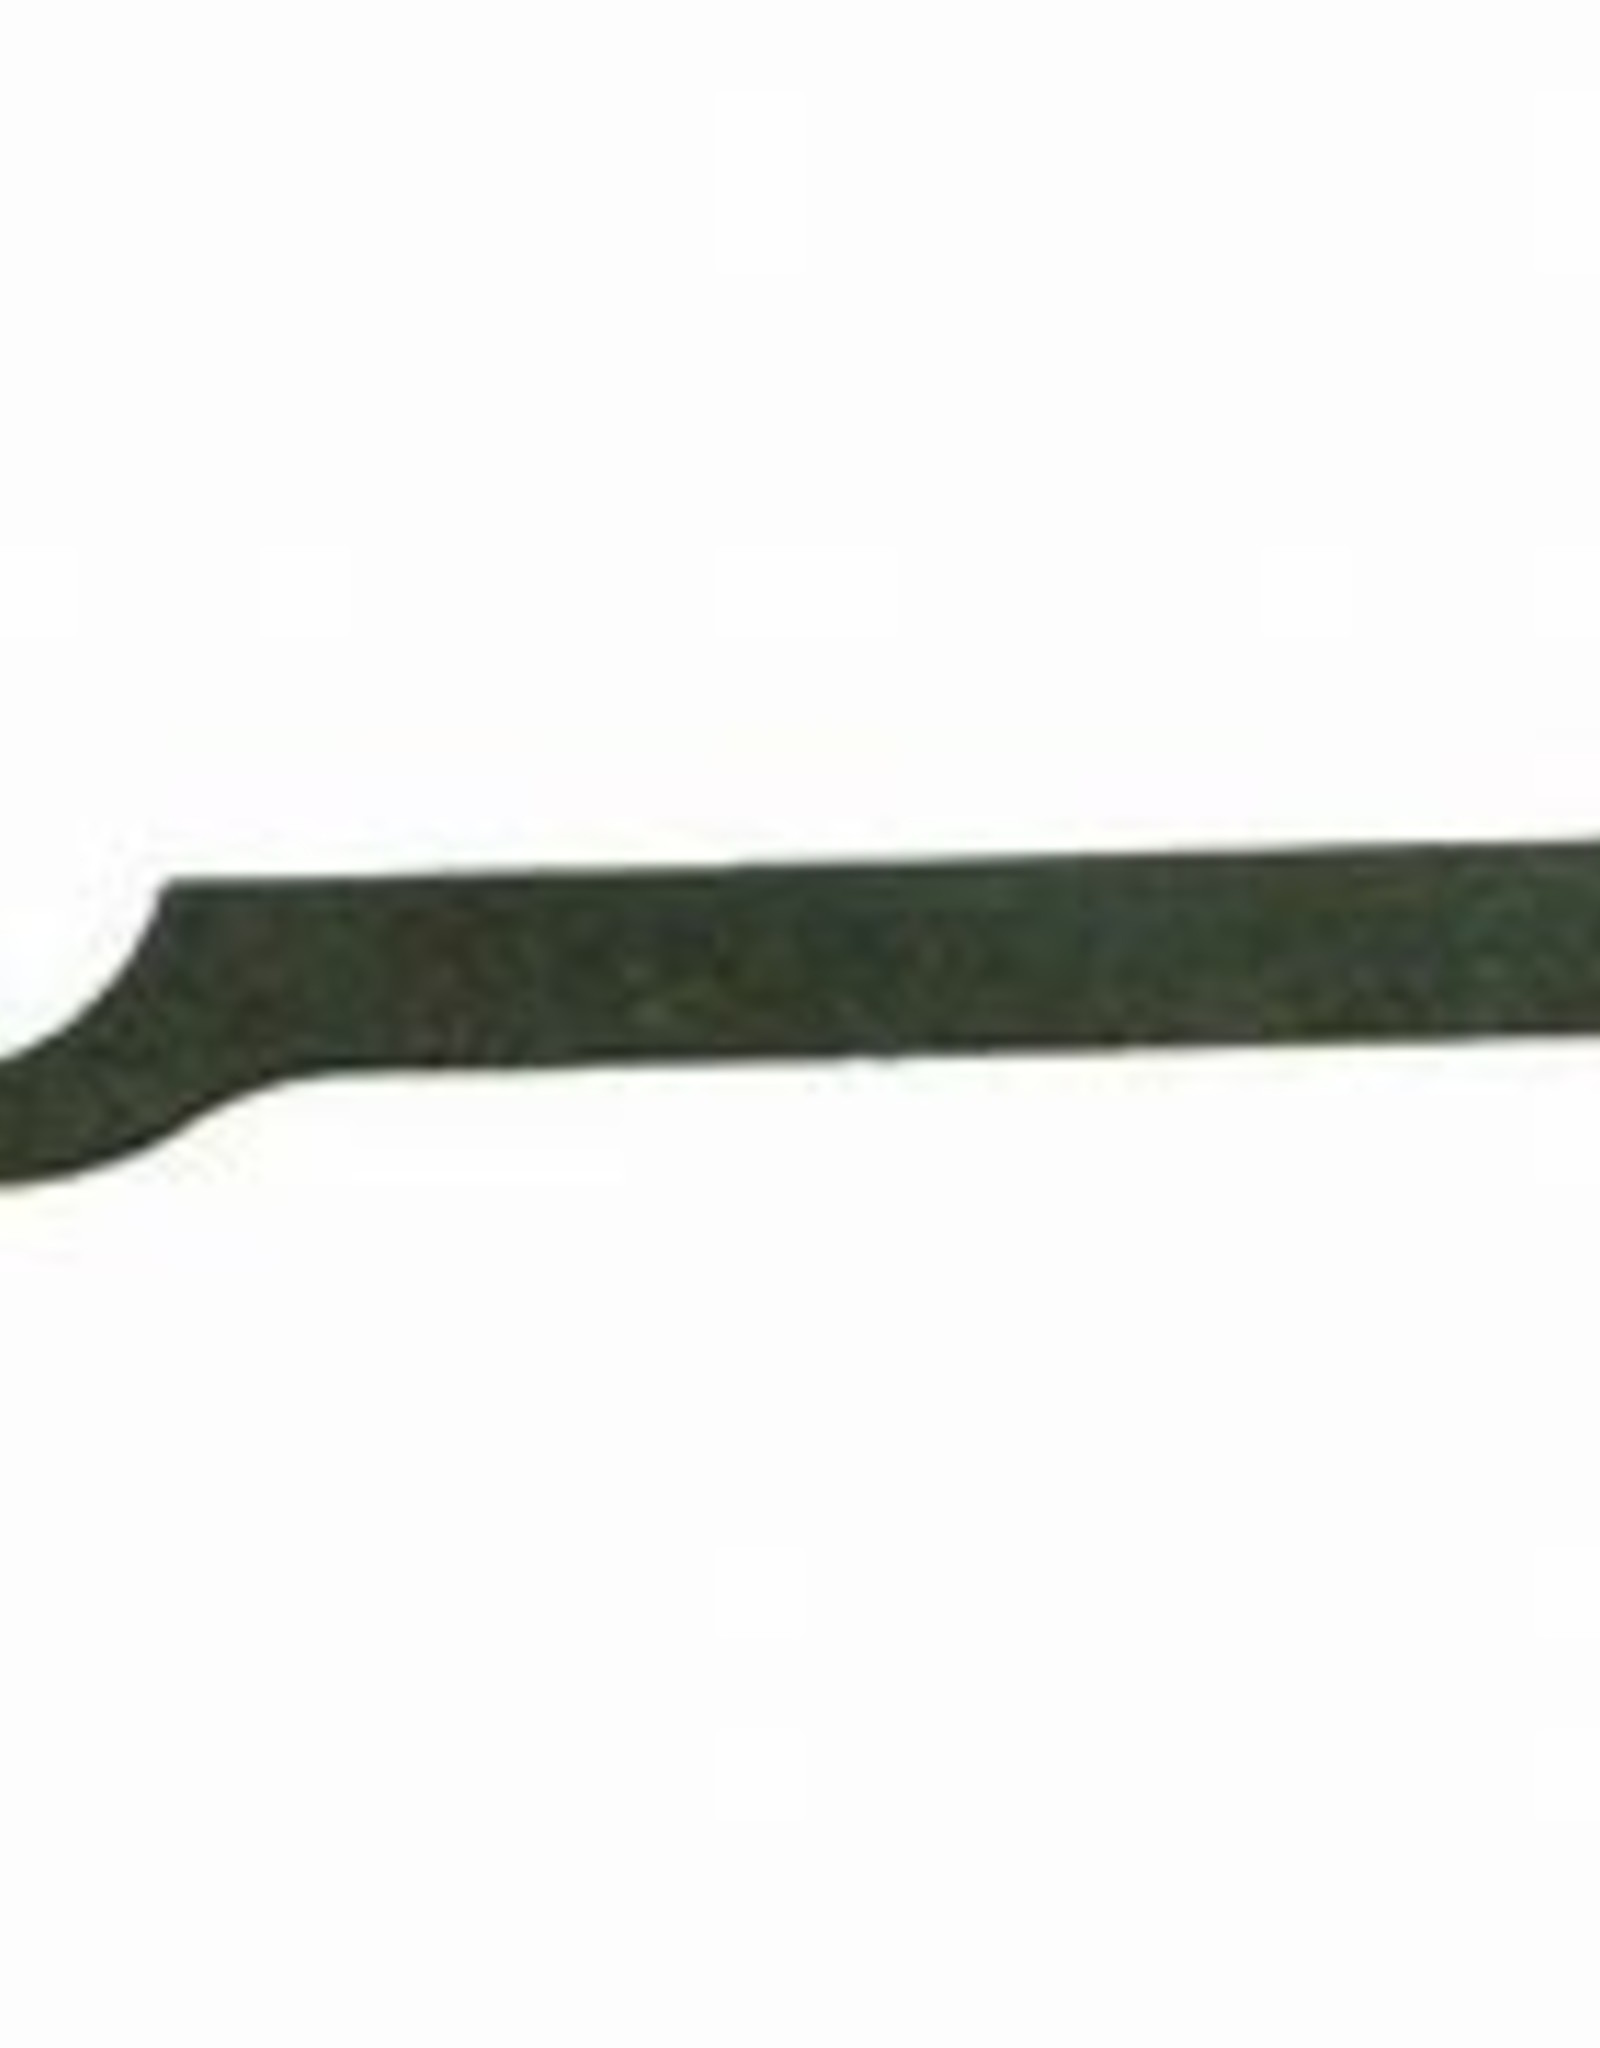 Traditions Accelerator Breech Plug Wrench